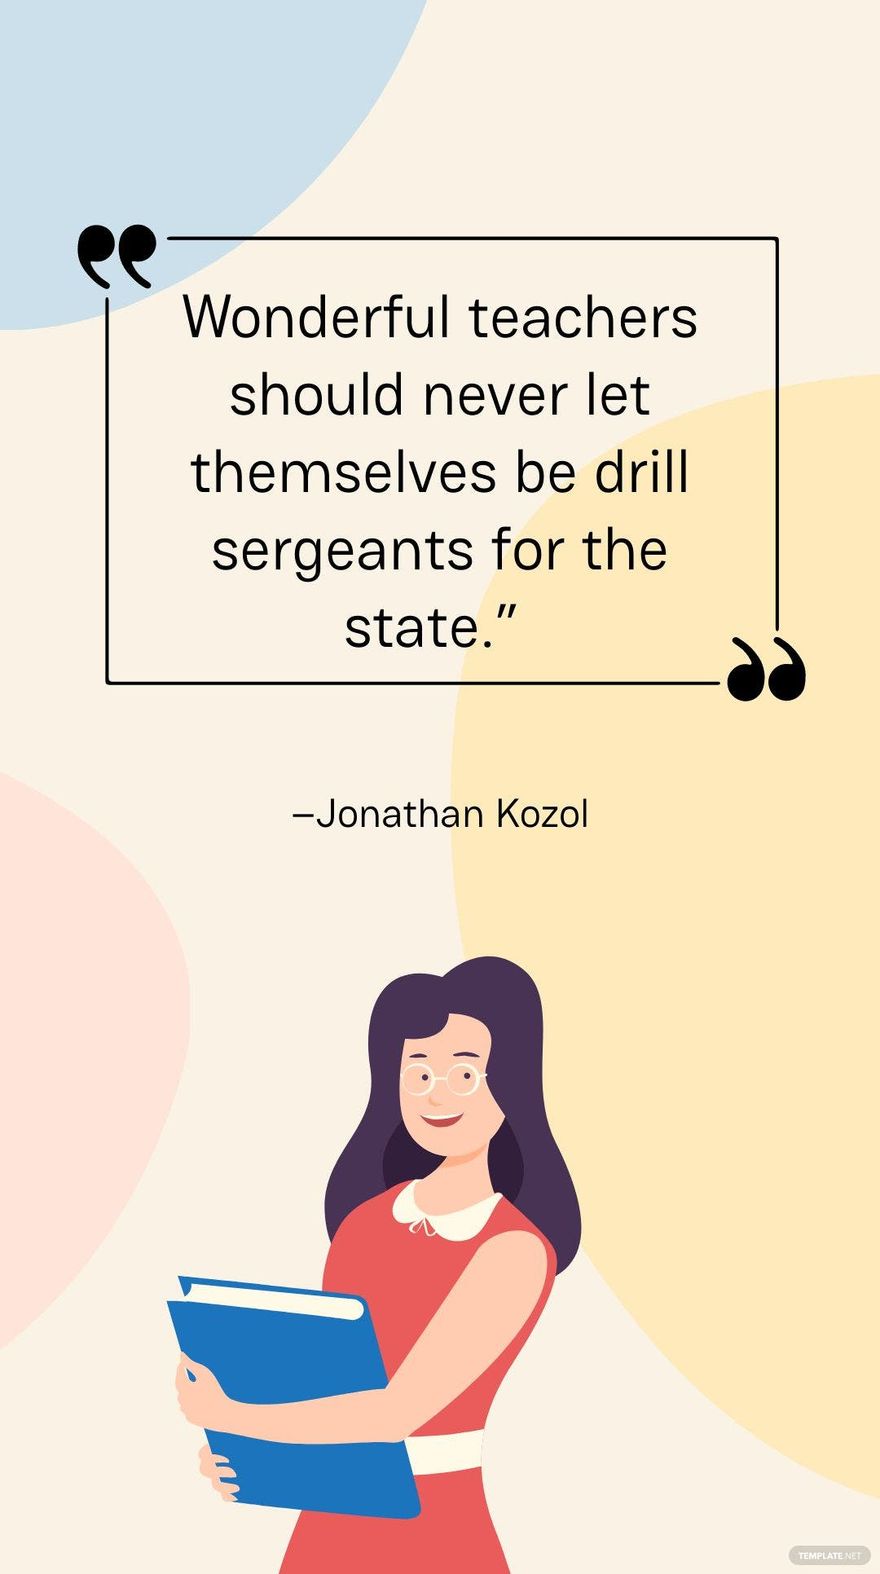 Free Jonathan Kozol - Wonderful teachers should never let themselves be drill sergeants for the state.